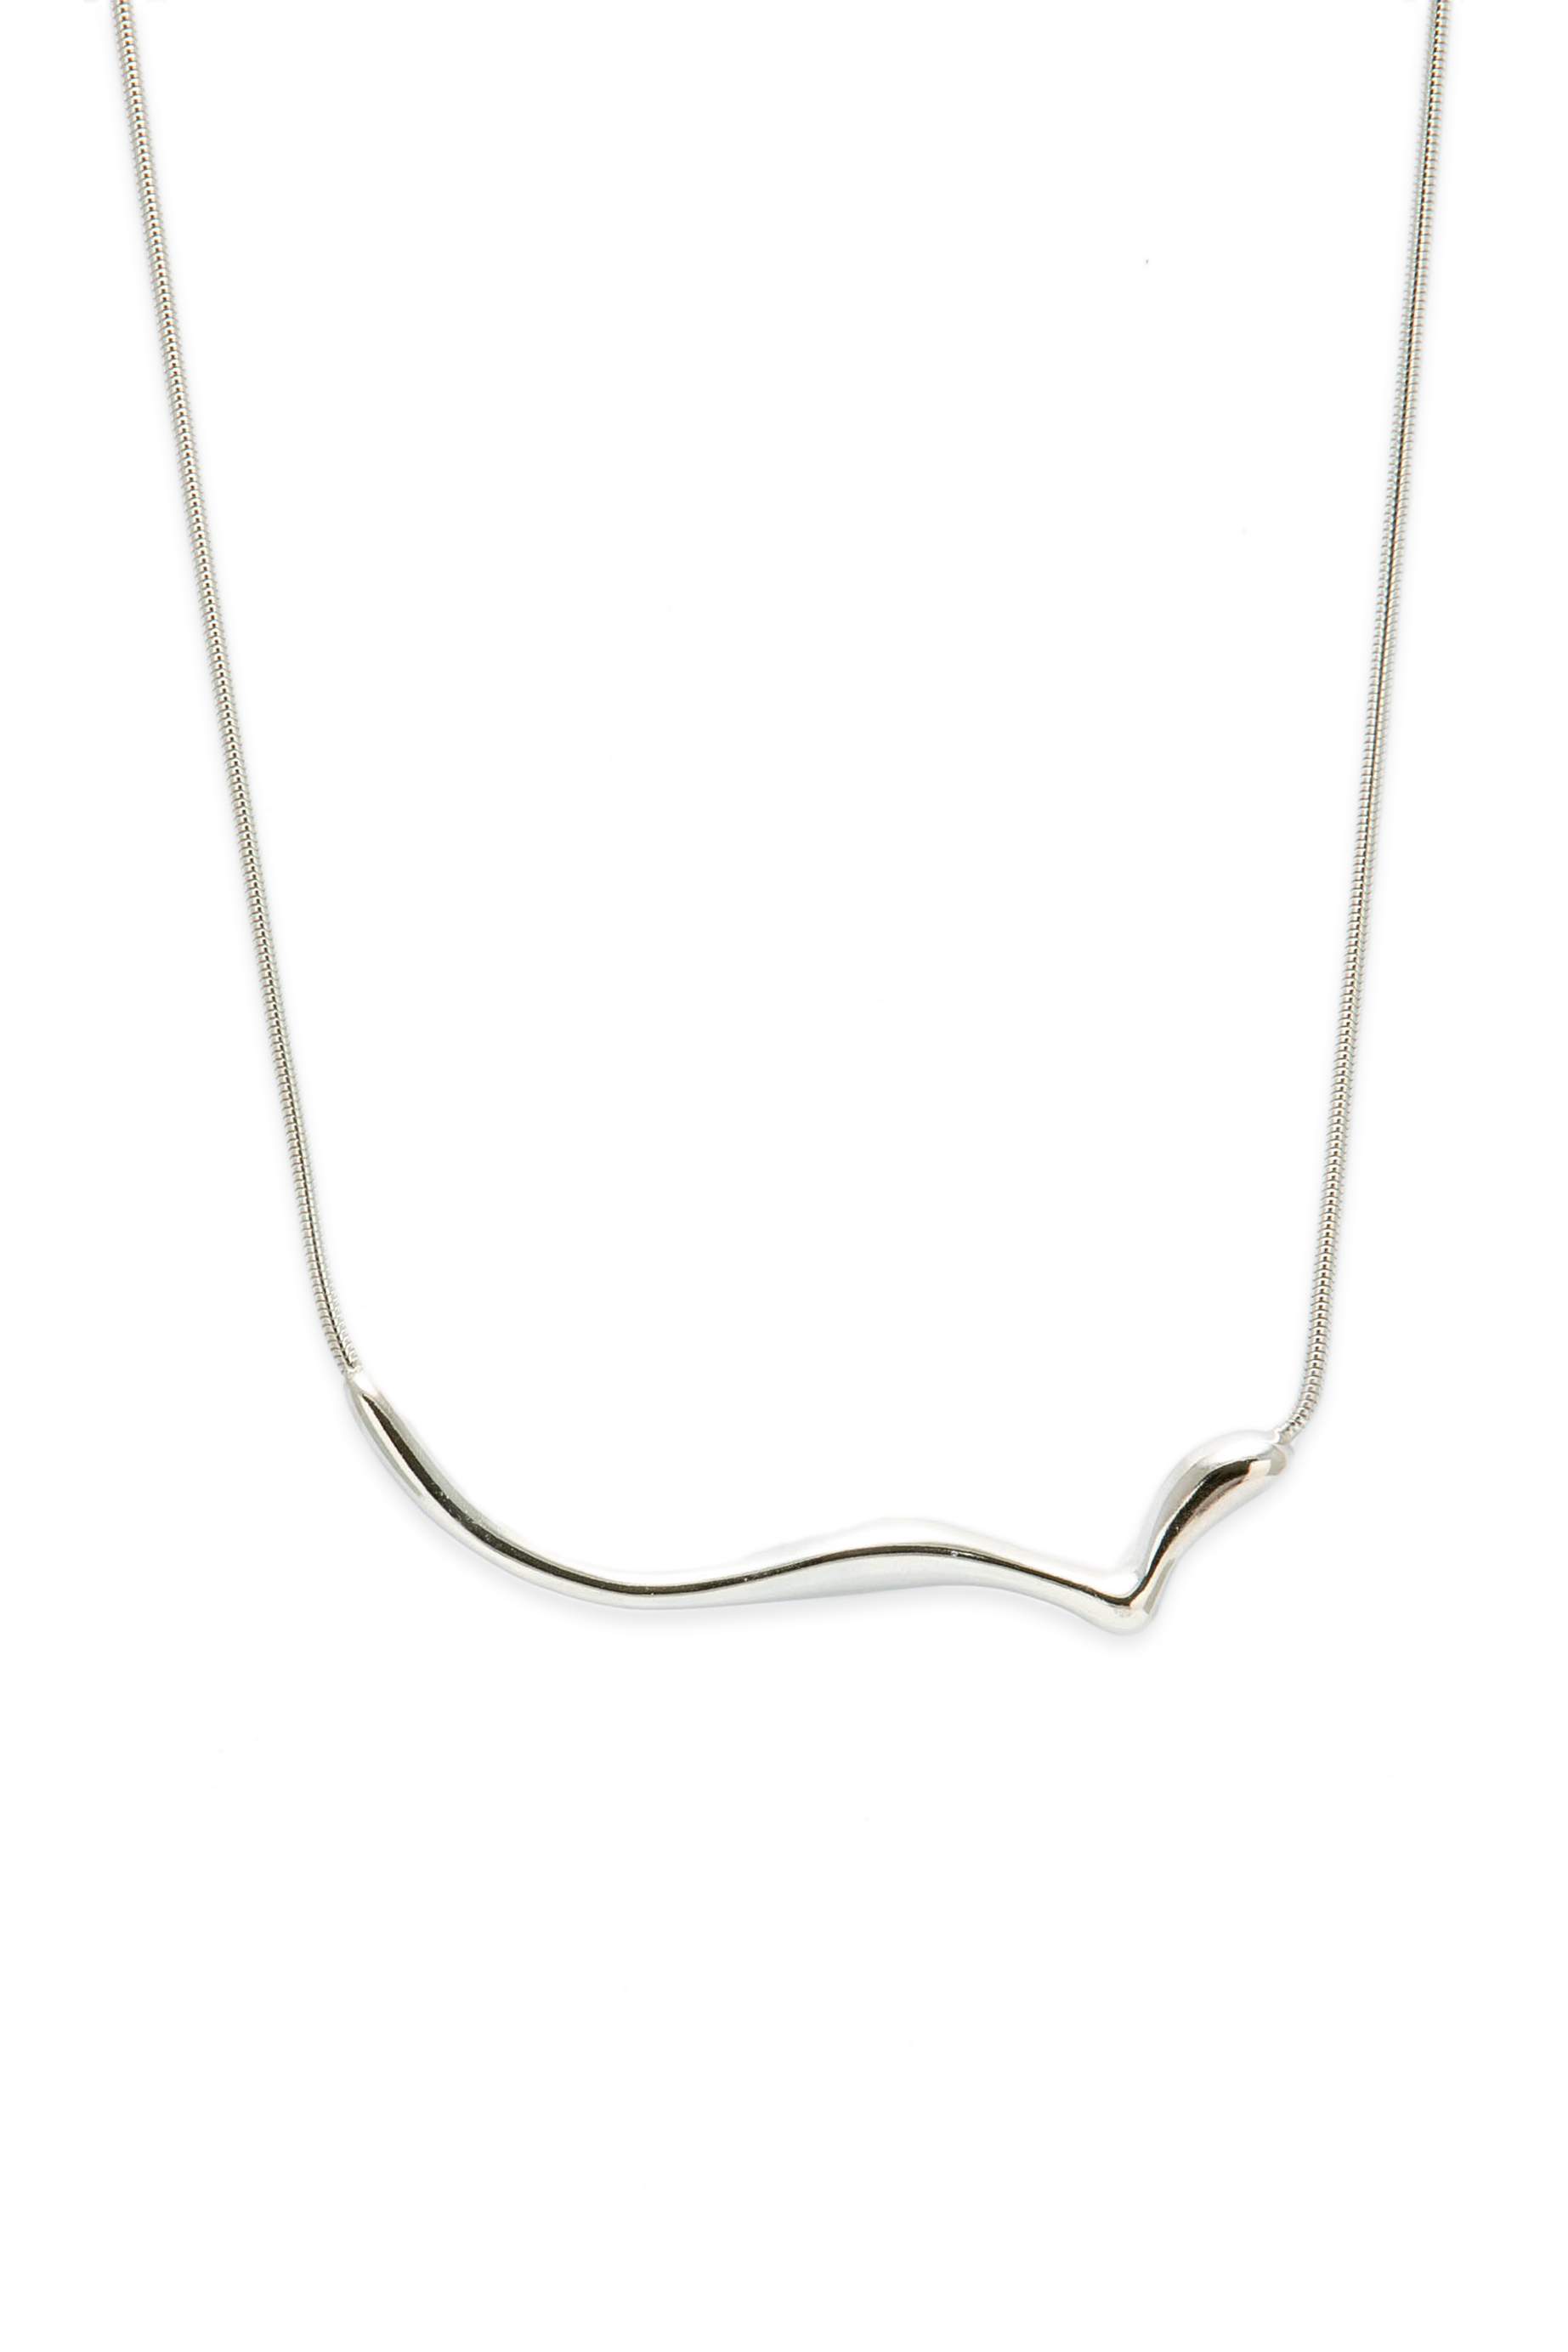 Recycled silver design necklace